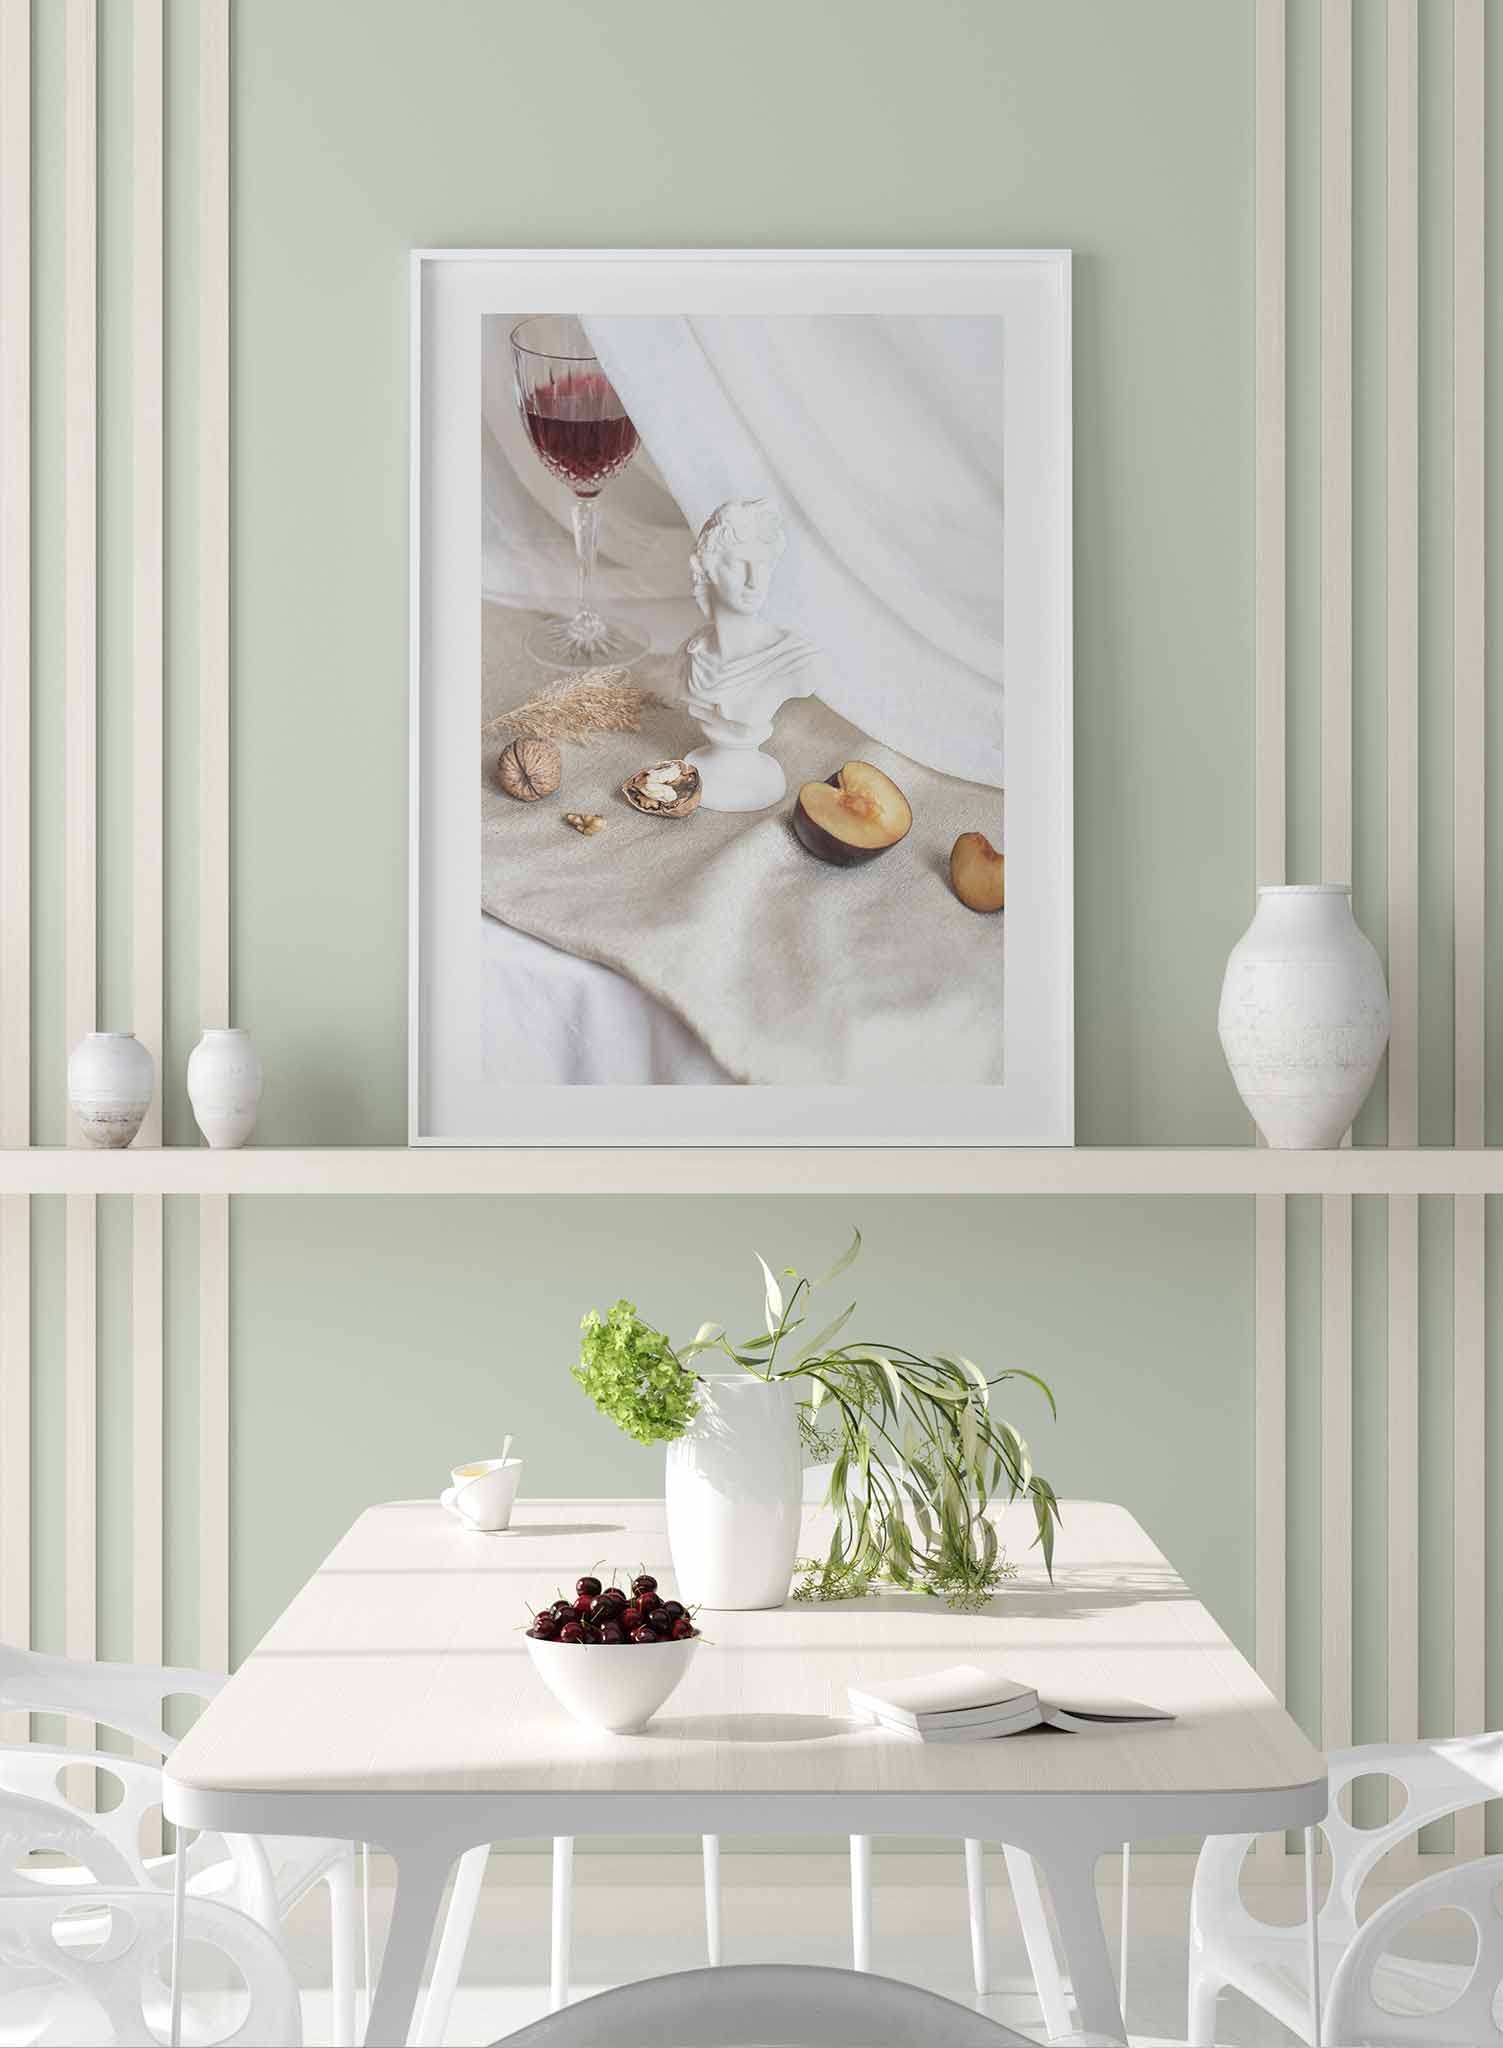 Bon Vivant is a still life photography poster with fruit and wine by Opposite Wall.